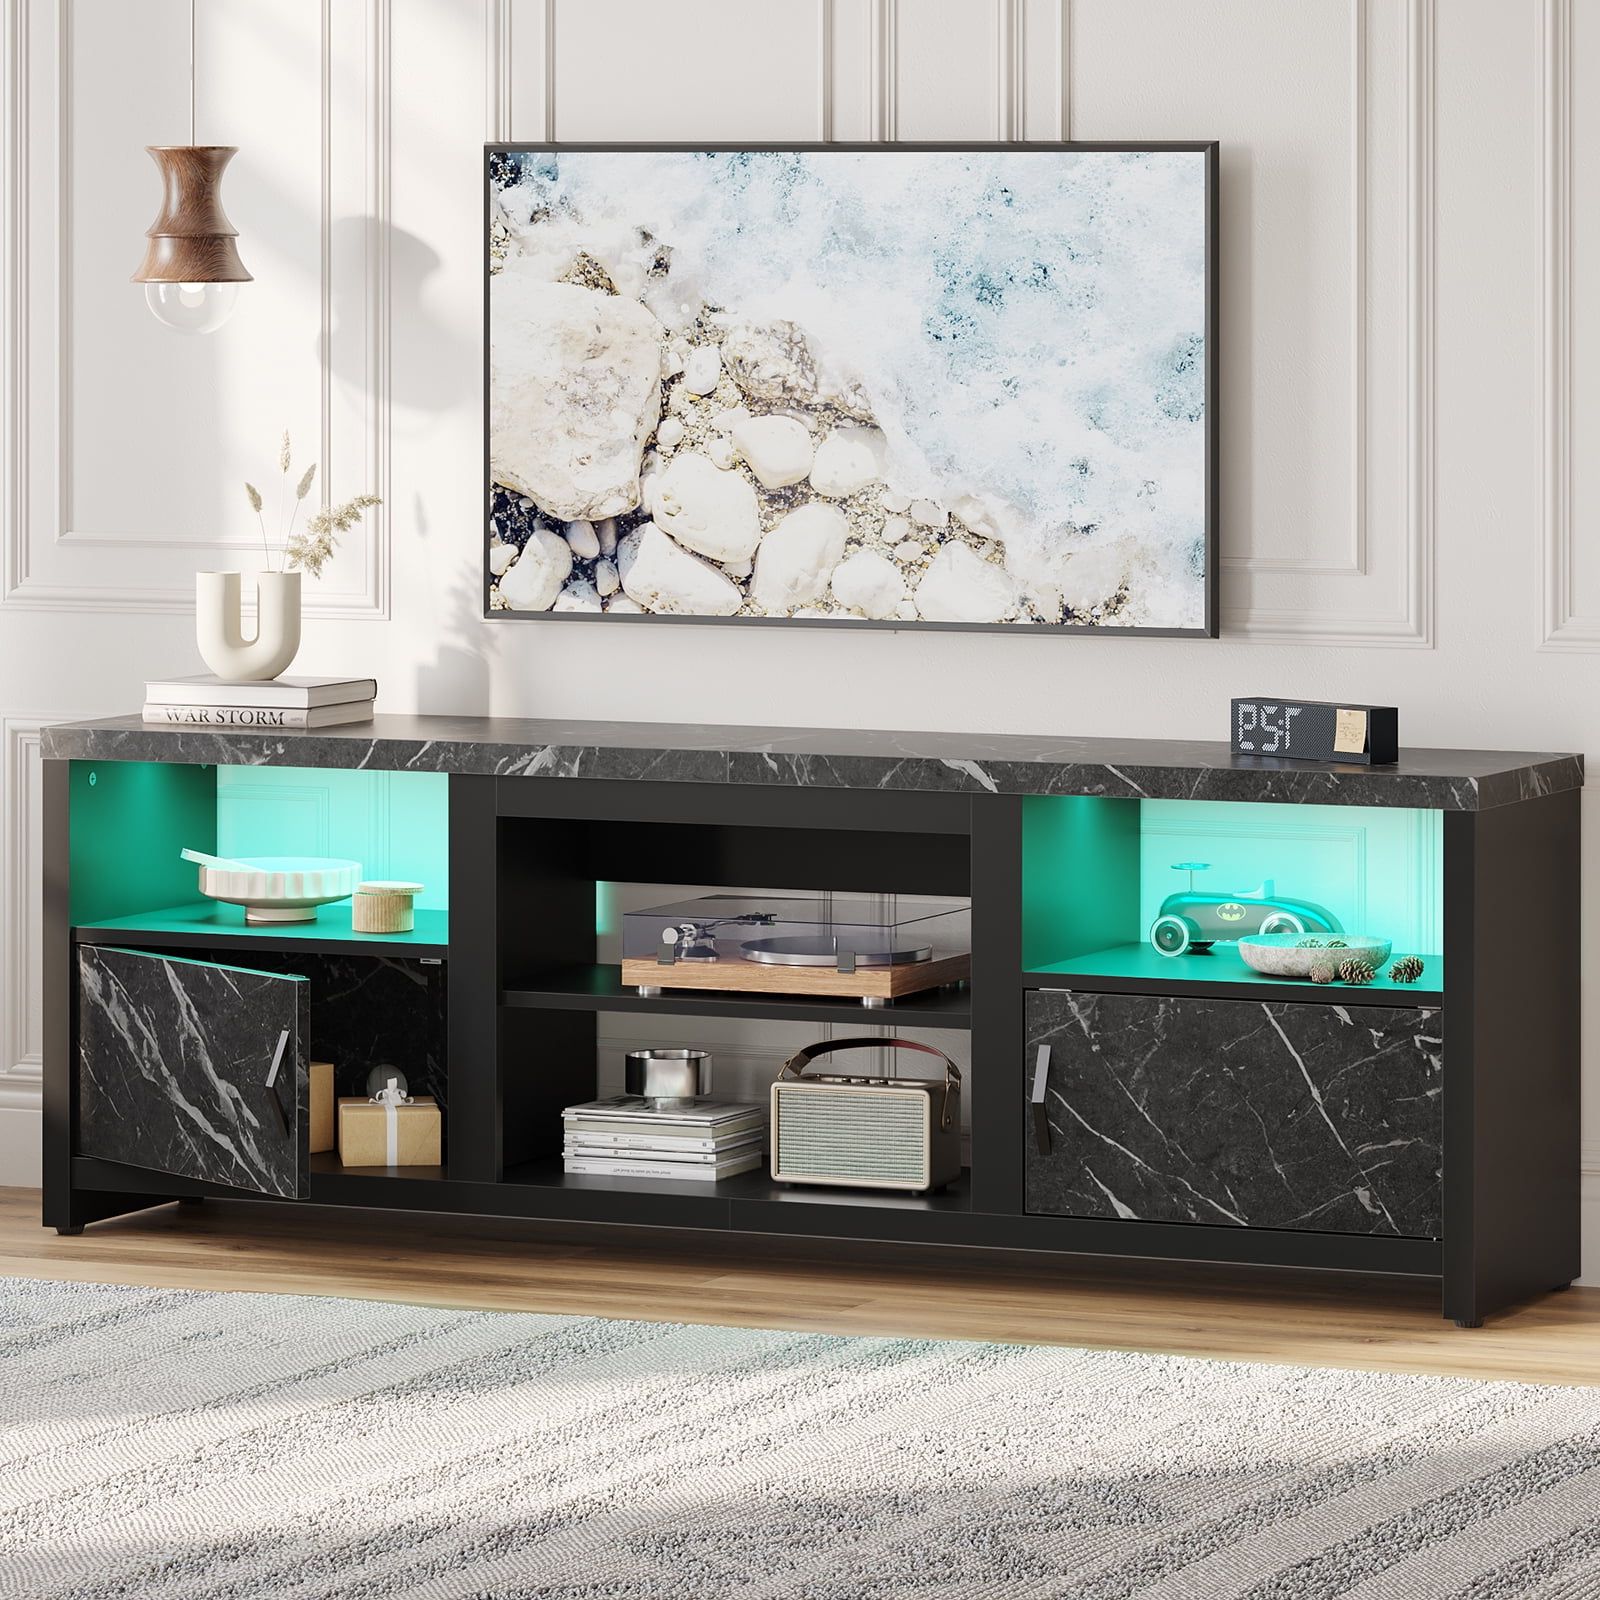 Latest Bestier Modern Tv Stand For Tvs Up To 75" With Led Lights Intended For Bestier Tv Stand For Tvs Up To 75" (View 9 of 15)